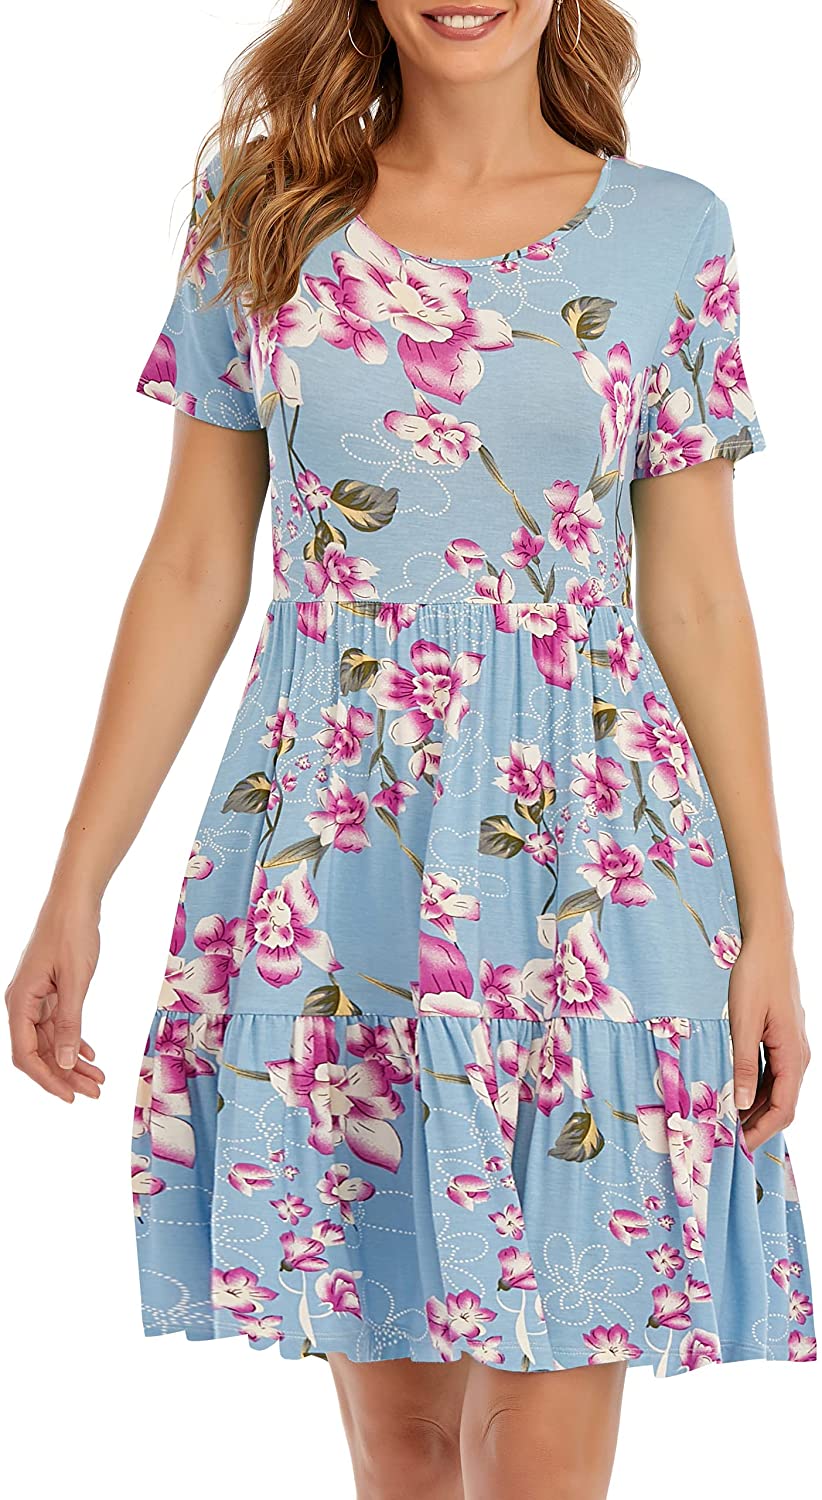 Casual Summer Dresses for Loose Pleated Dress Knee Length | eBay